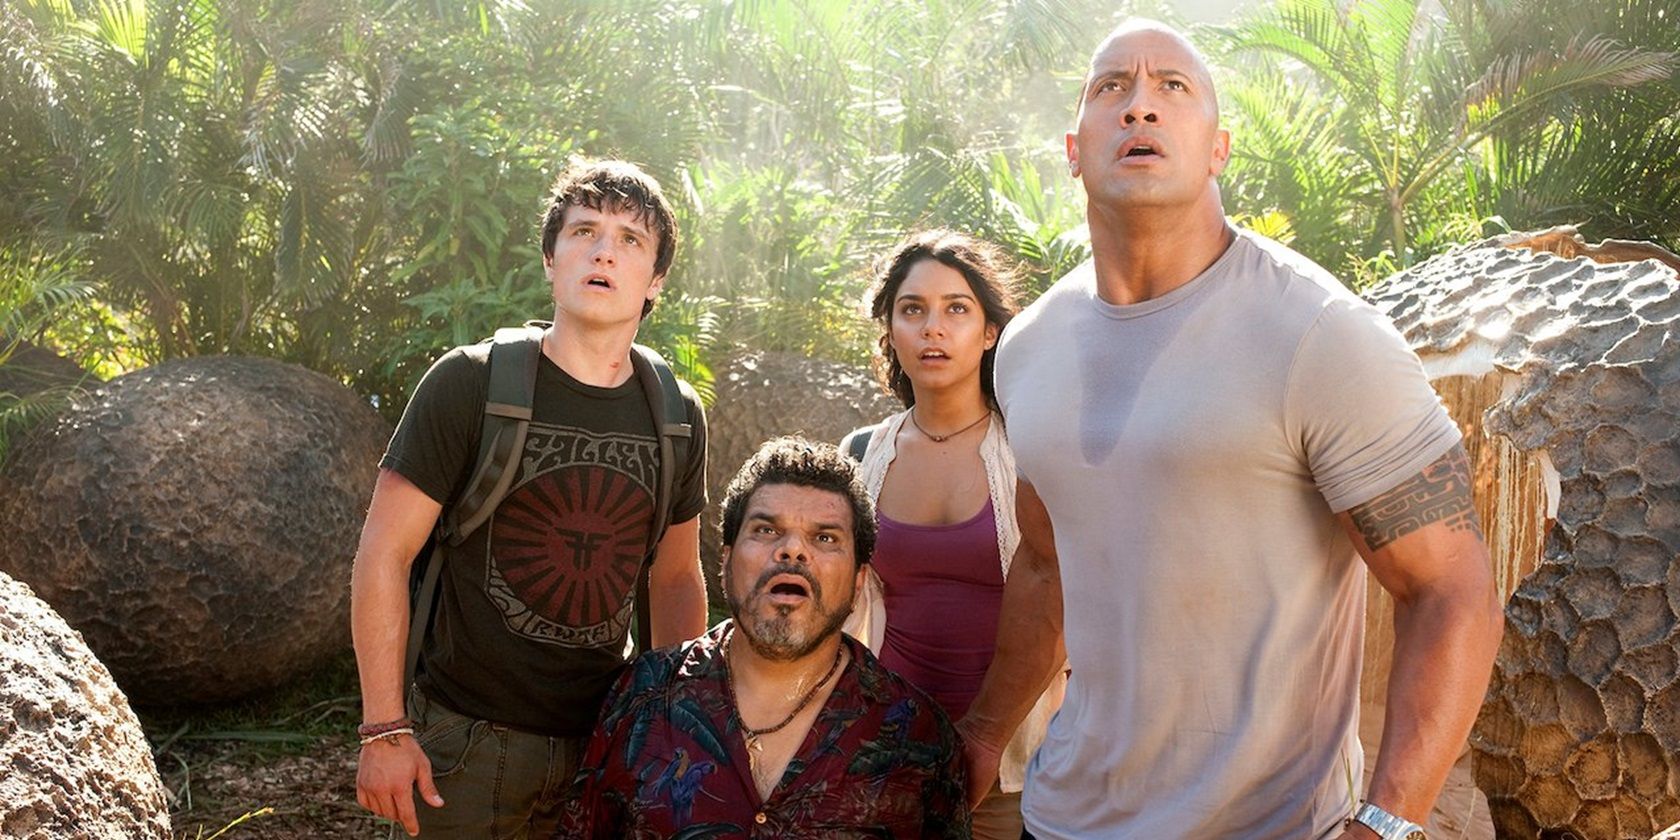 Dwayne Johnson and the cast of Journey 2: The Mysterious Island looking up in shock